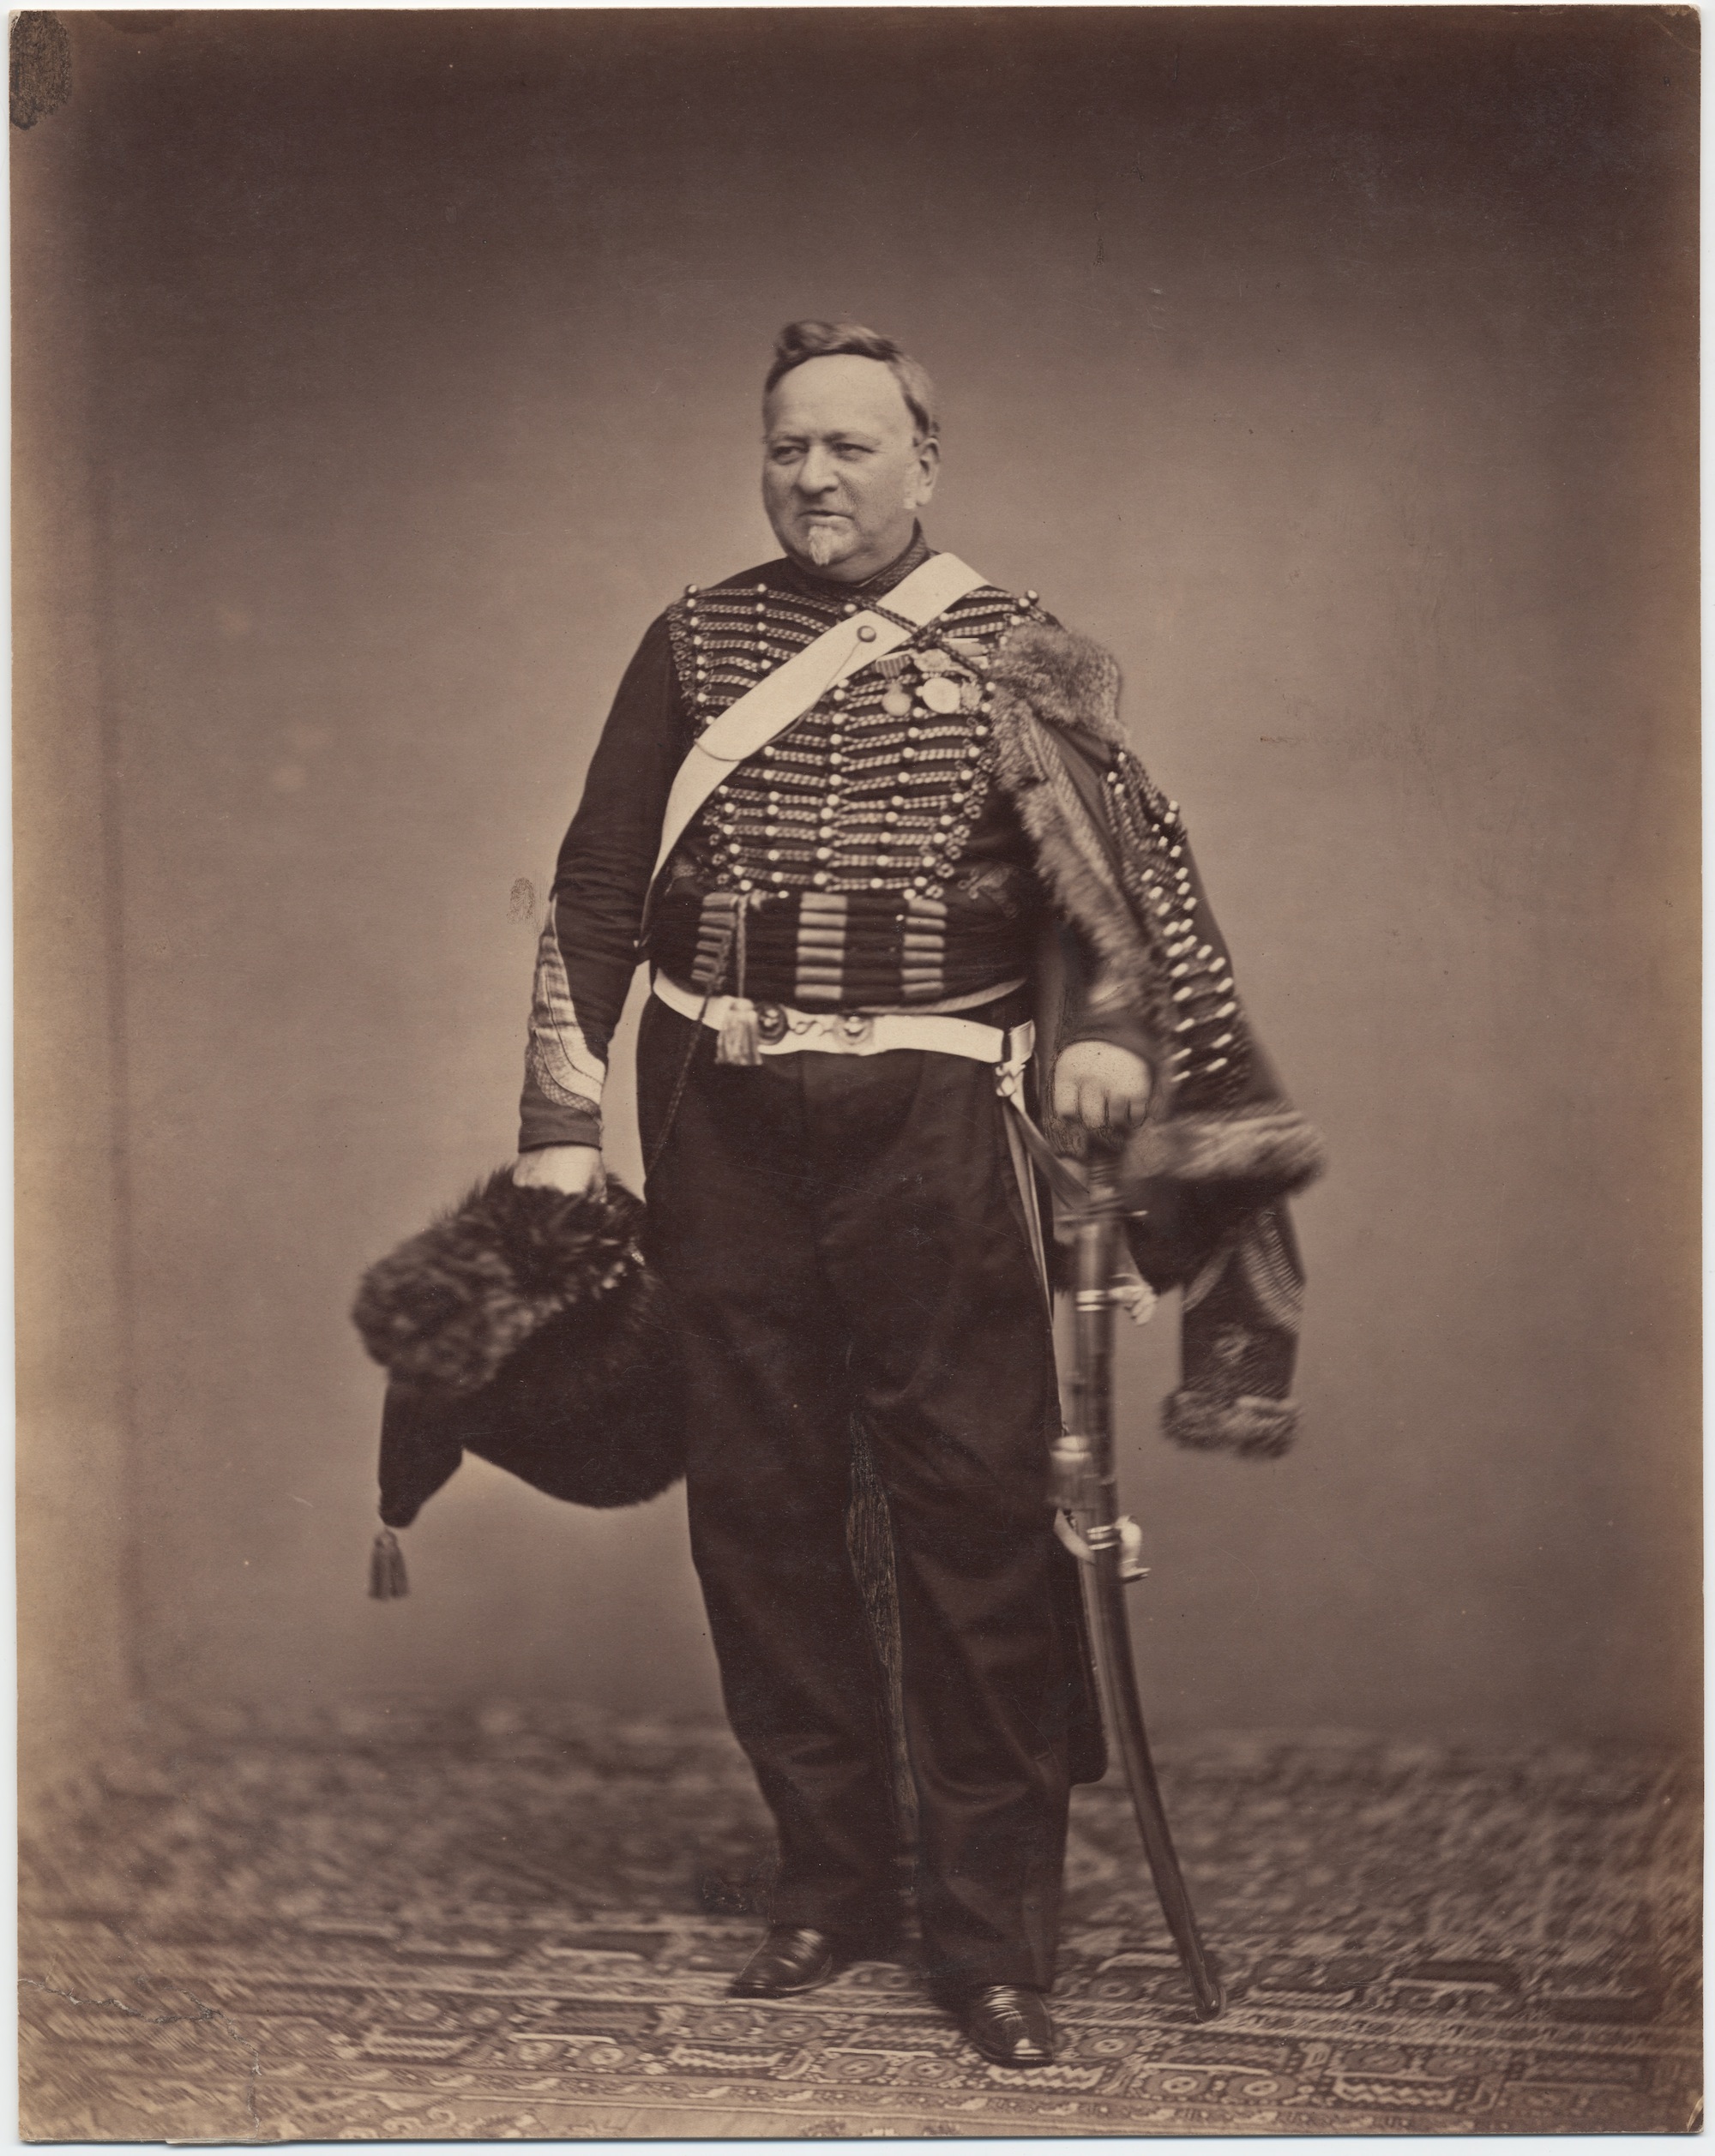 Quartermaster Sergeant Delignon, in the uniform of a Mounted Chasseur of the Guard, 1809-1815